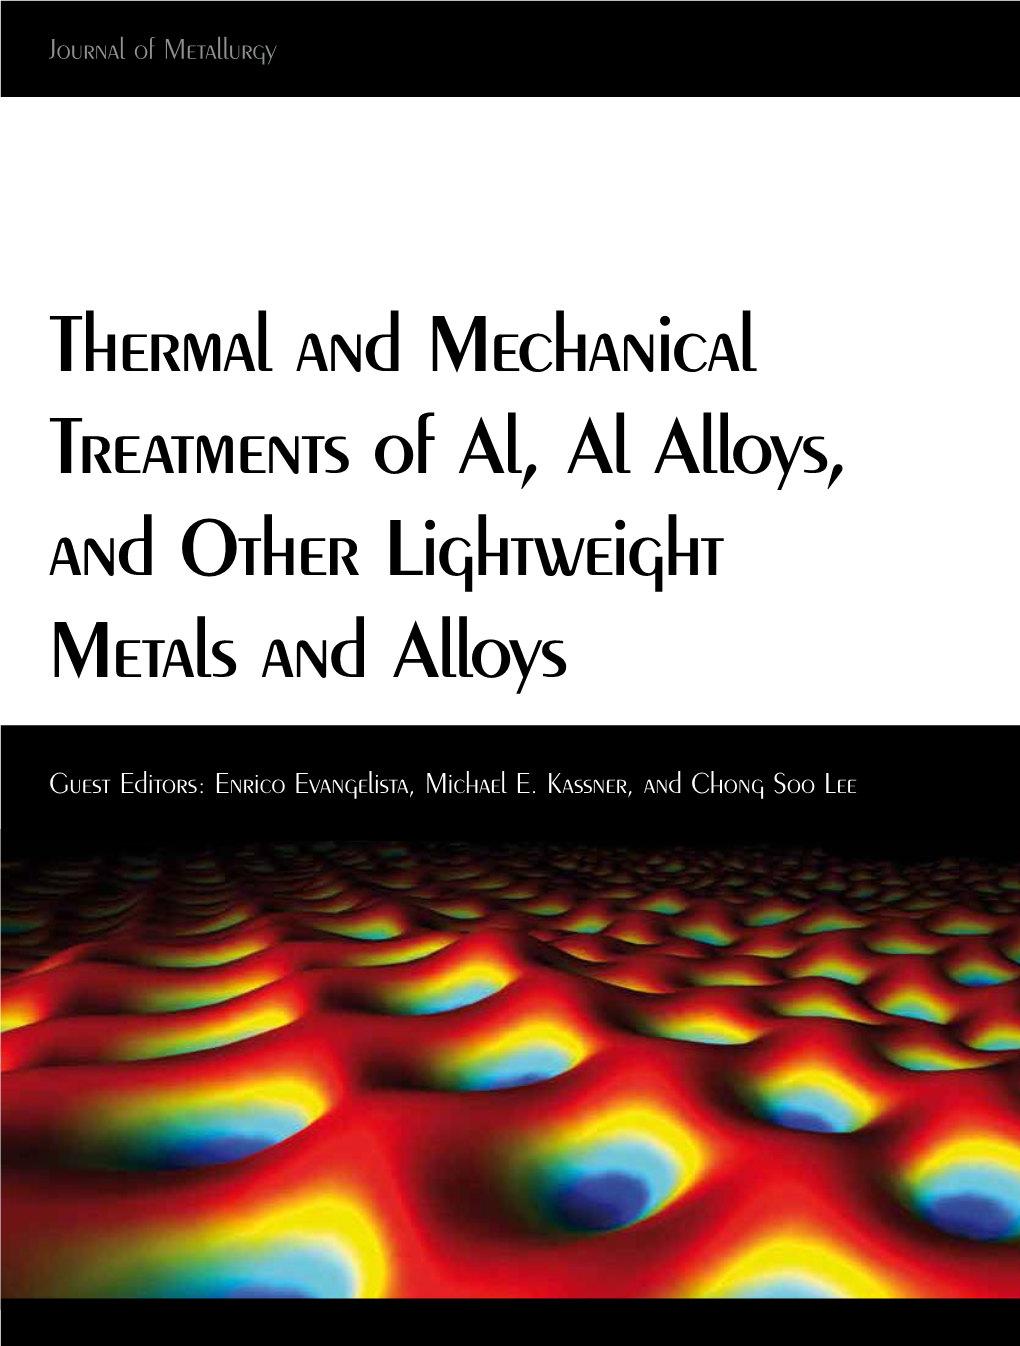 Thermal and Mechanical Treatments of Al, Al Alloys, and Other Lightweight Metals and Alloys